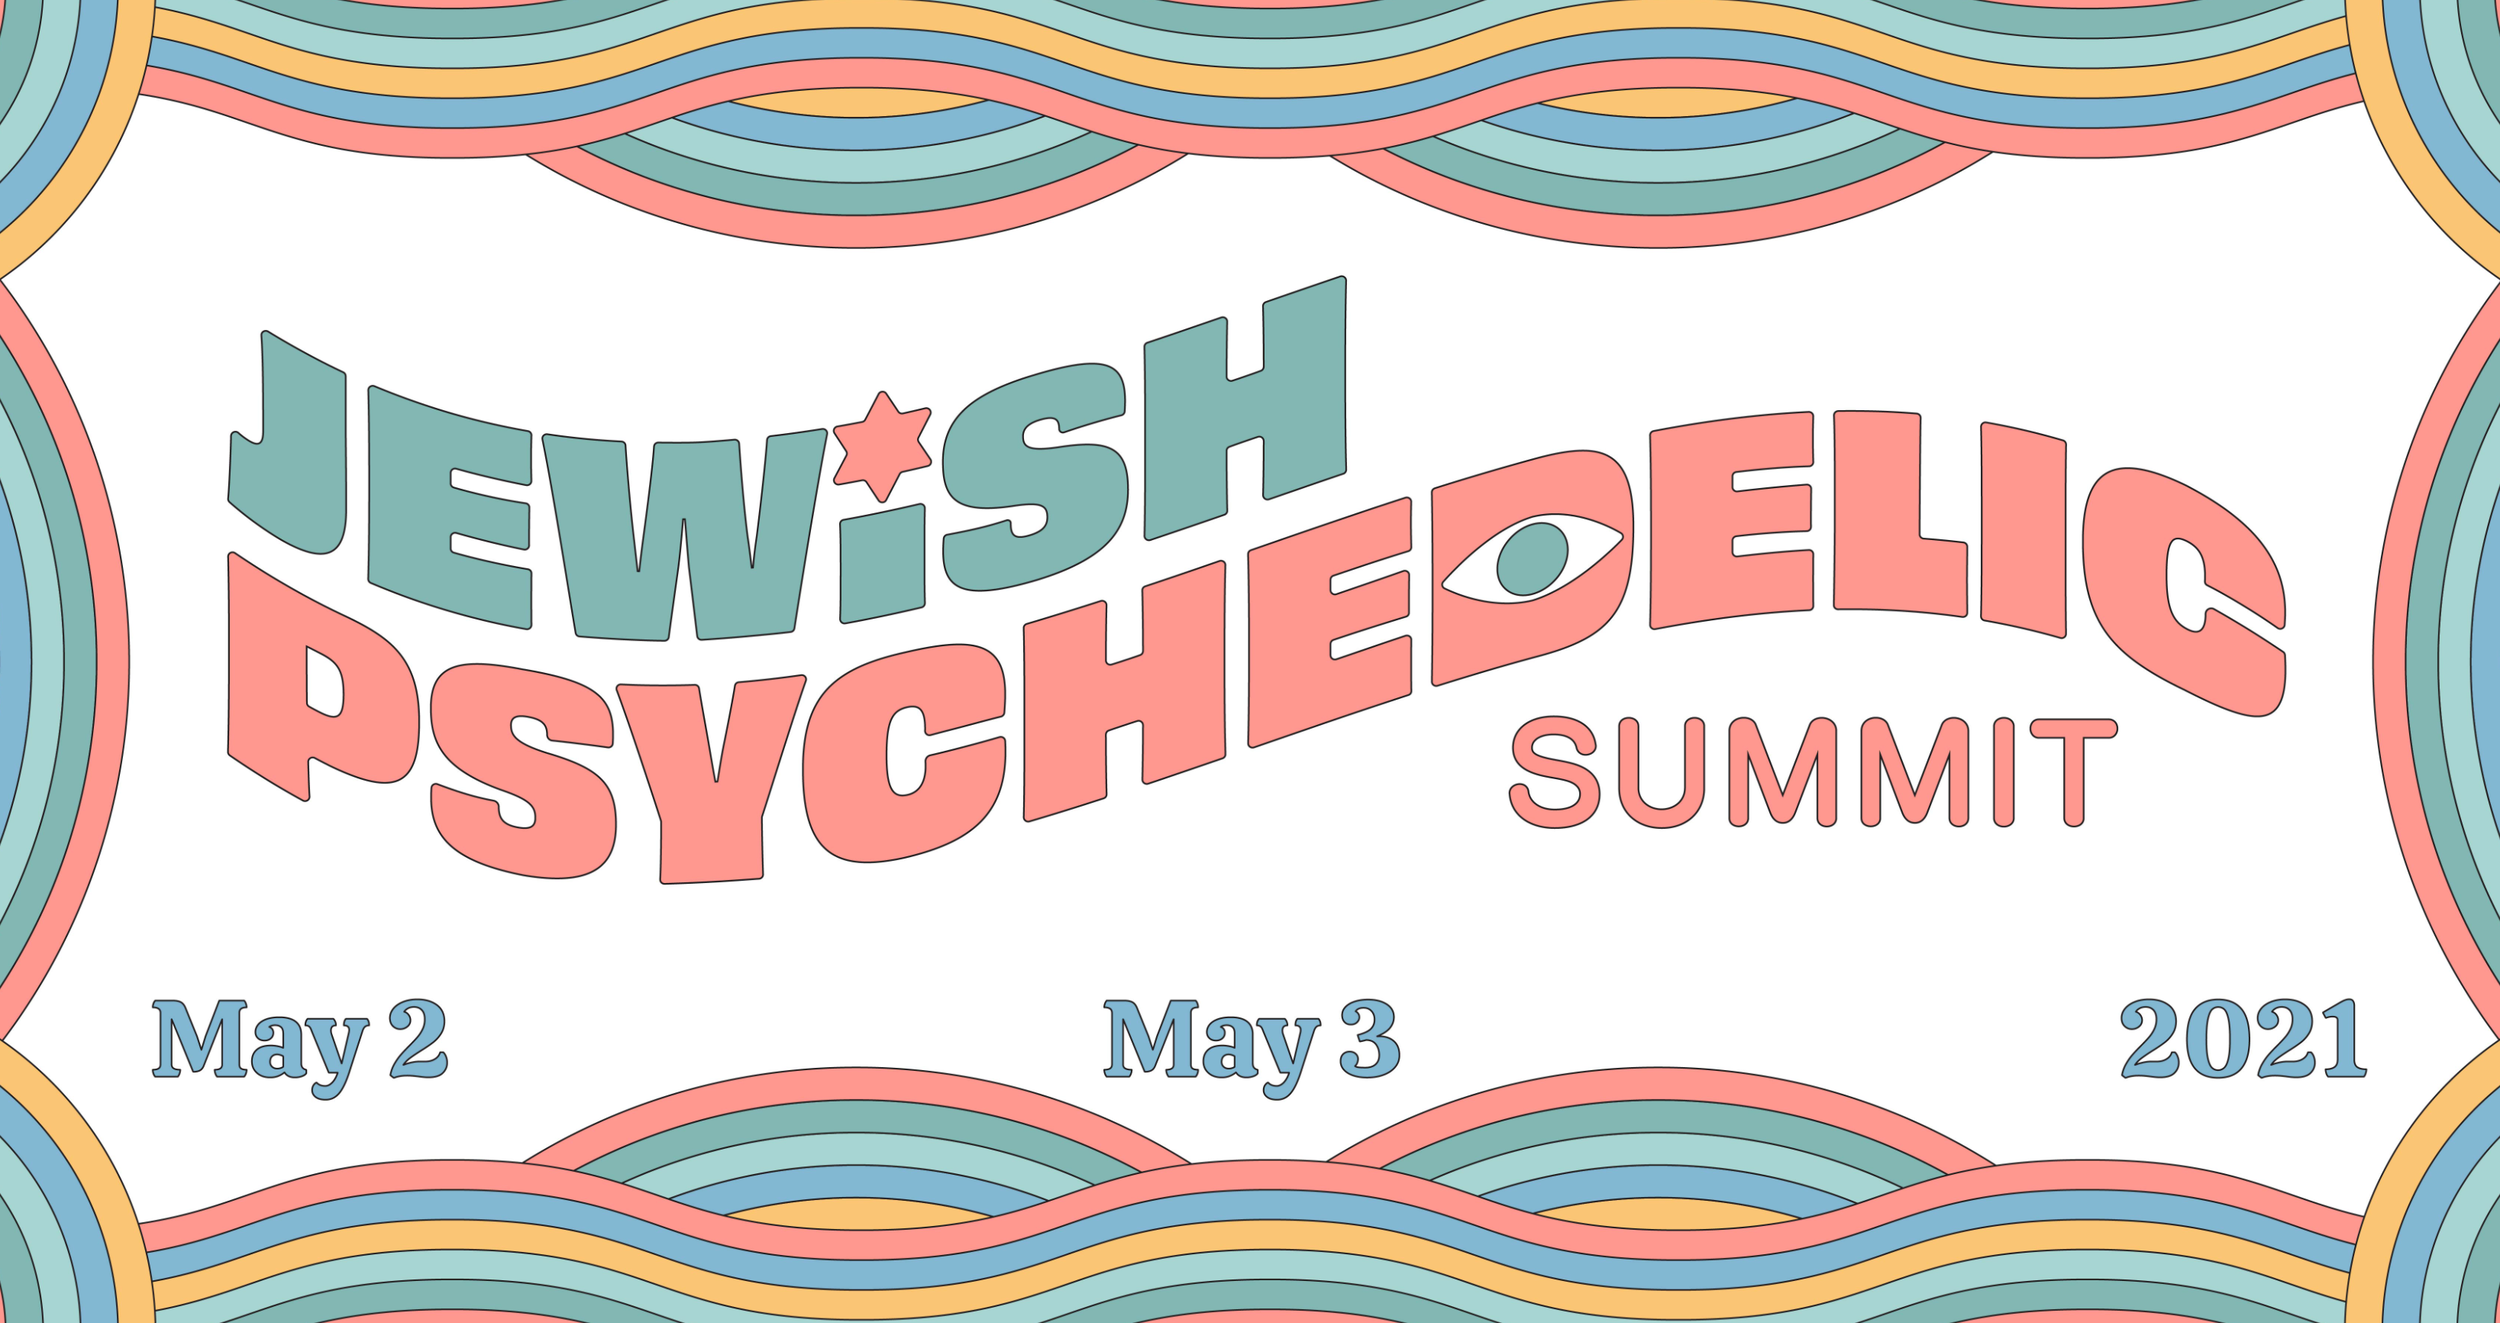 Jewish Psychedelic Summit.png